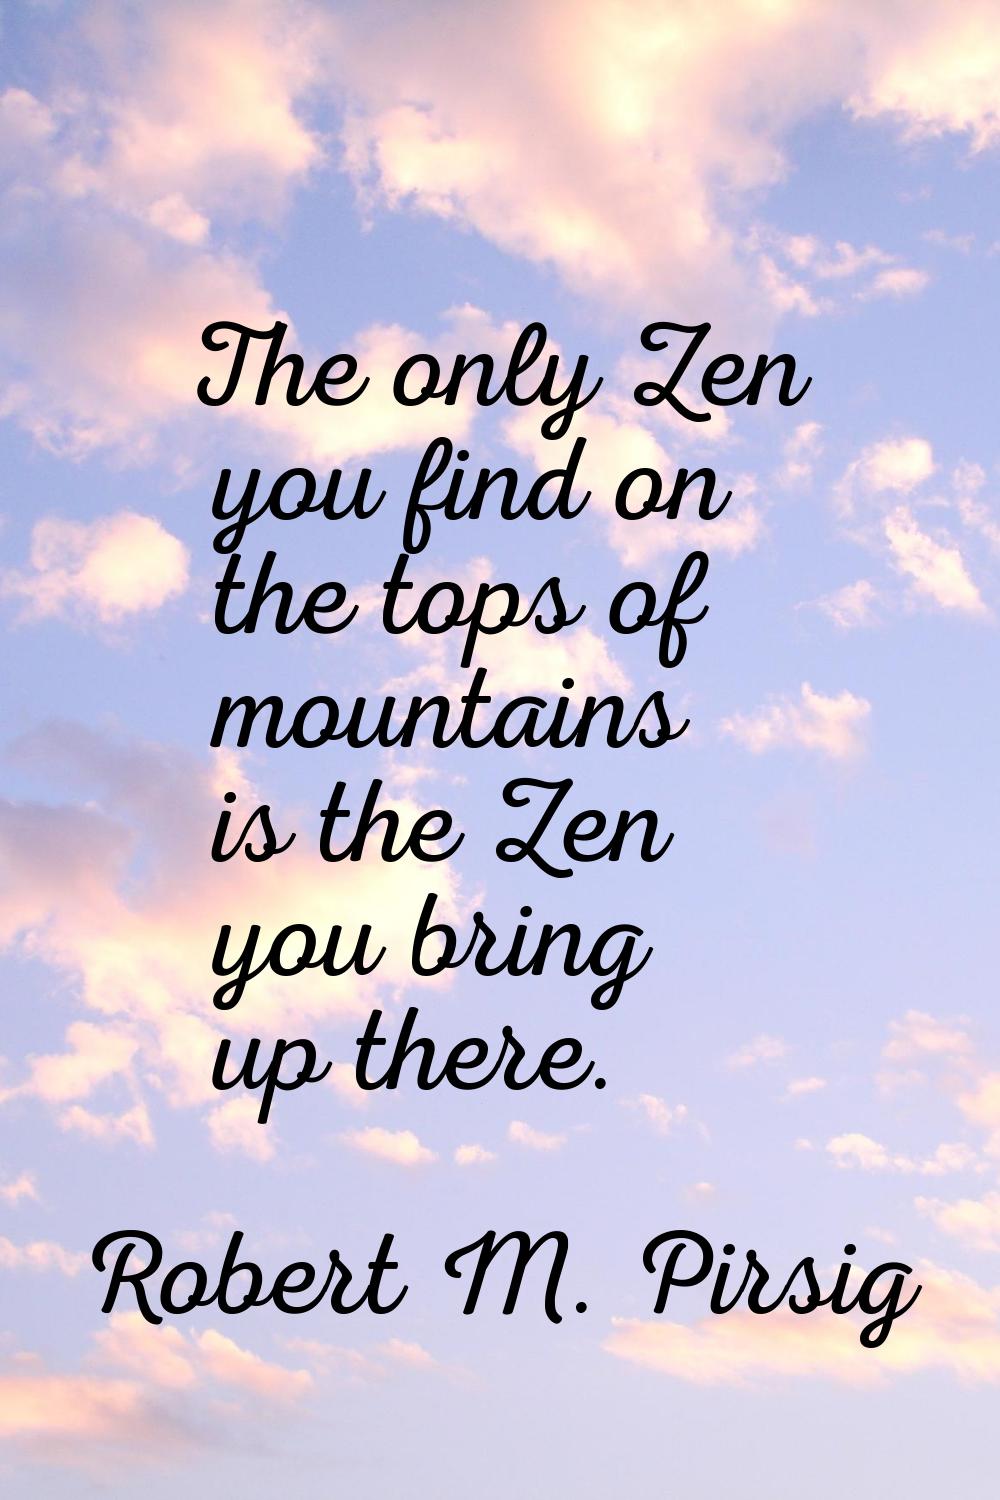 The only Zen you find on the tops of mountains is the Zen you bring up there.